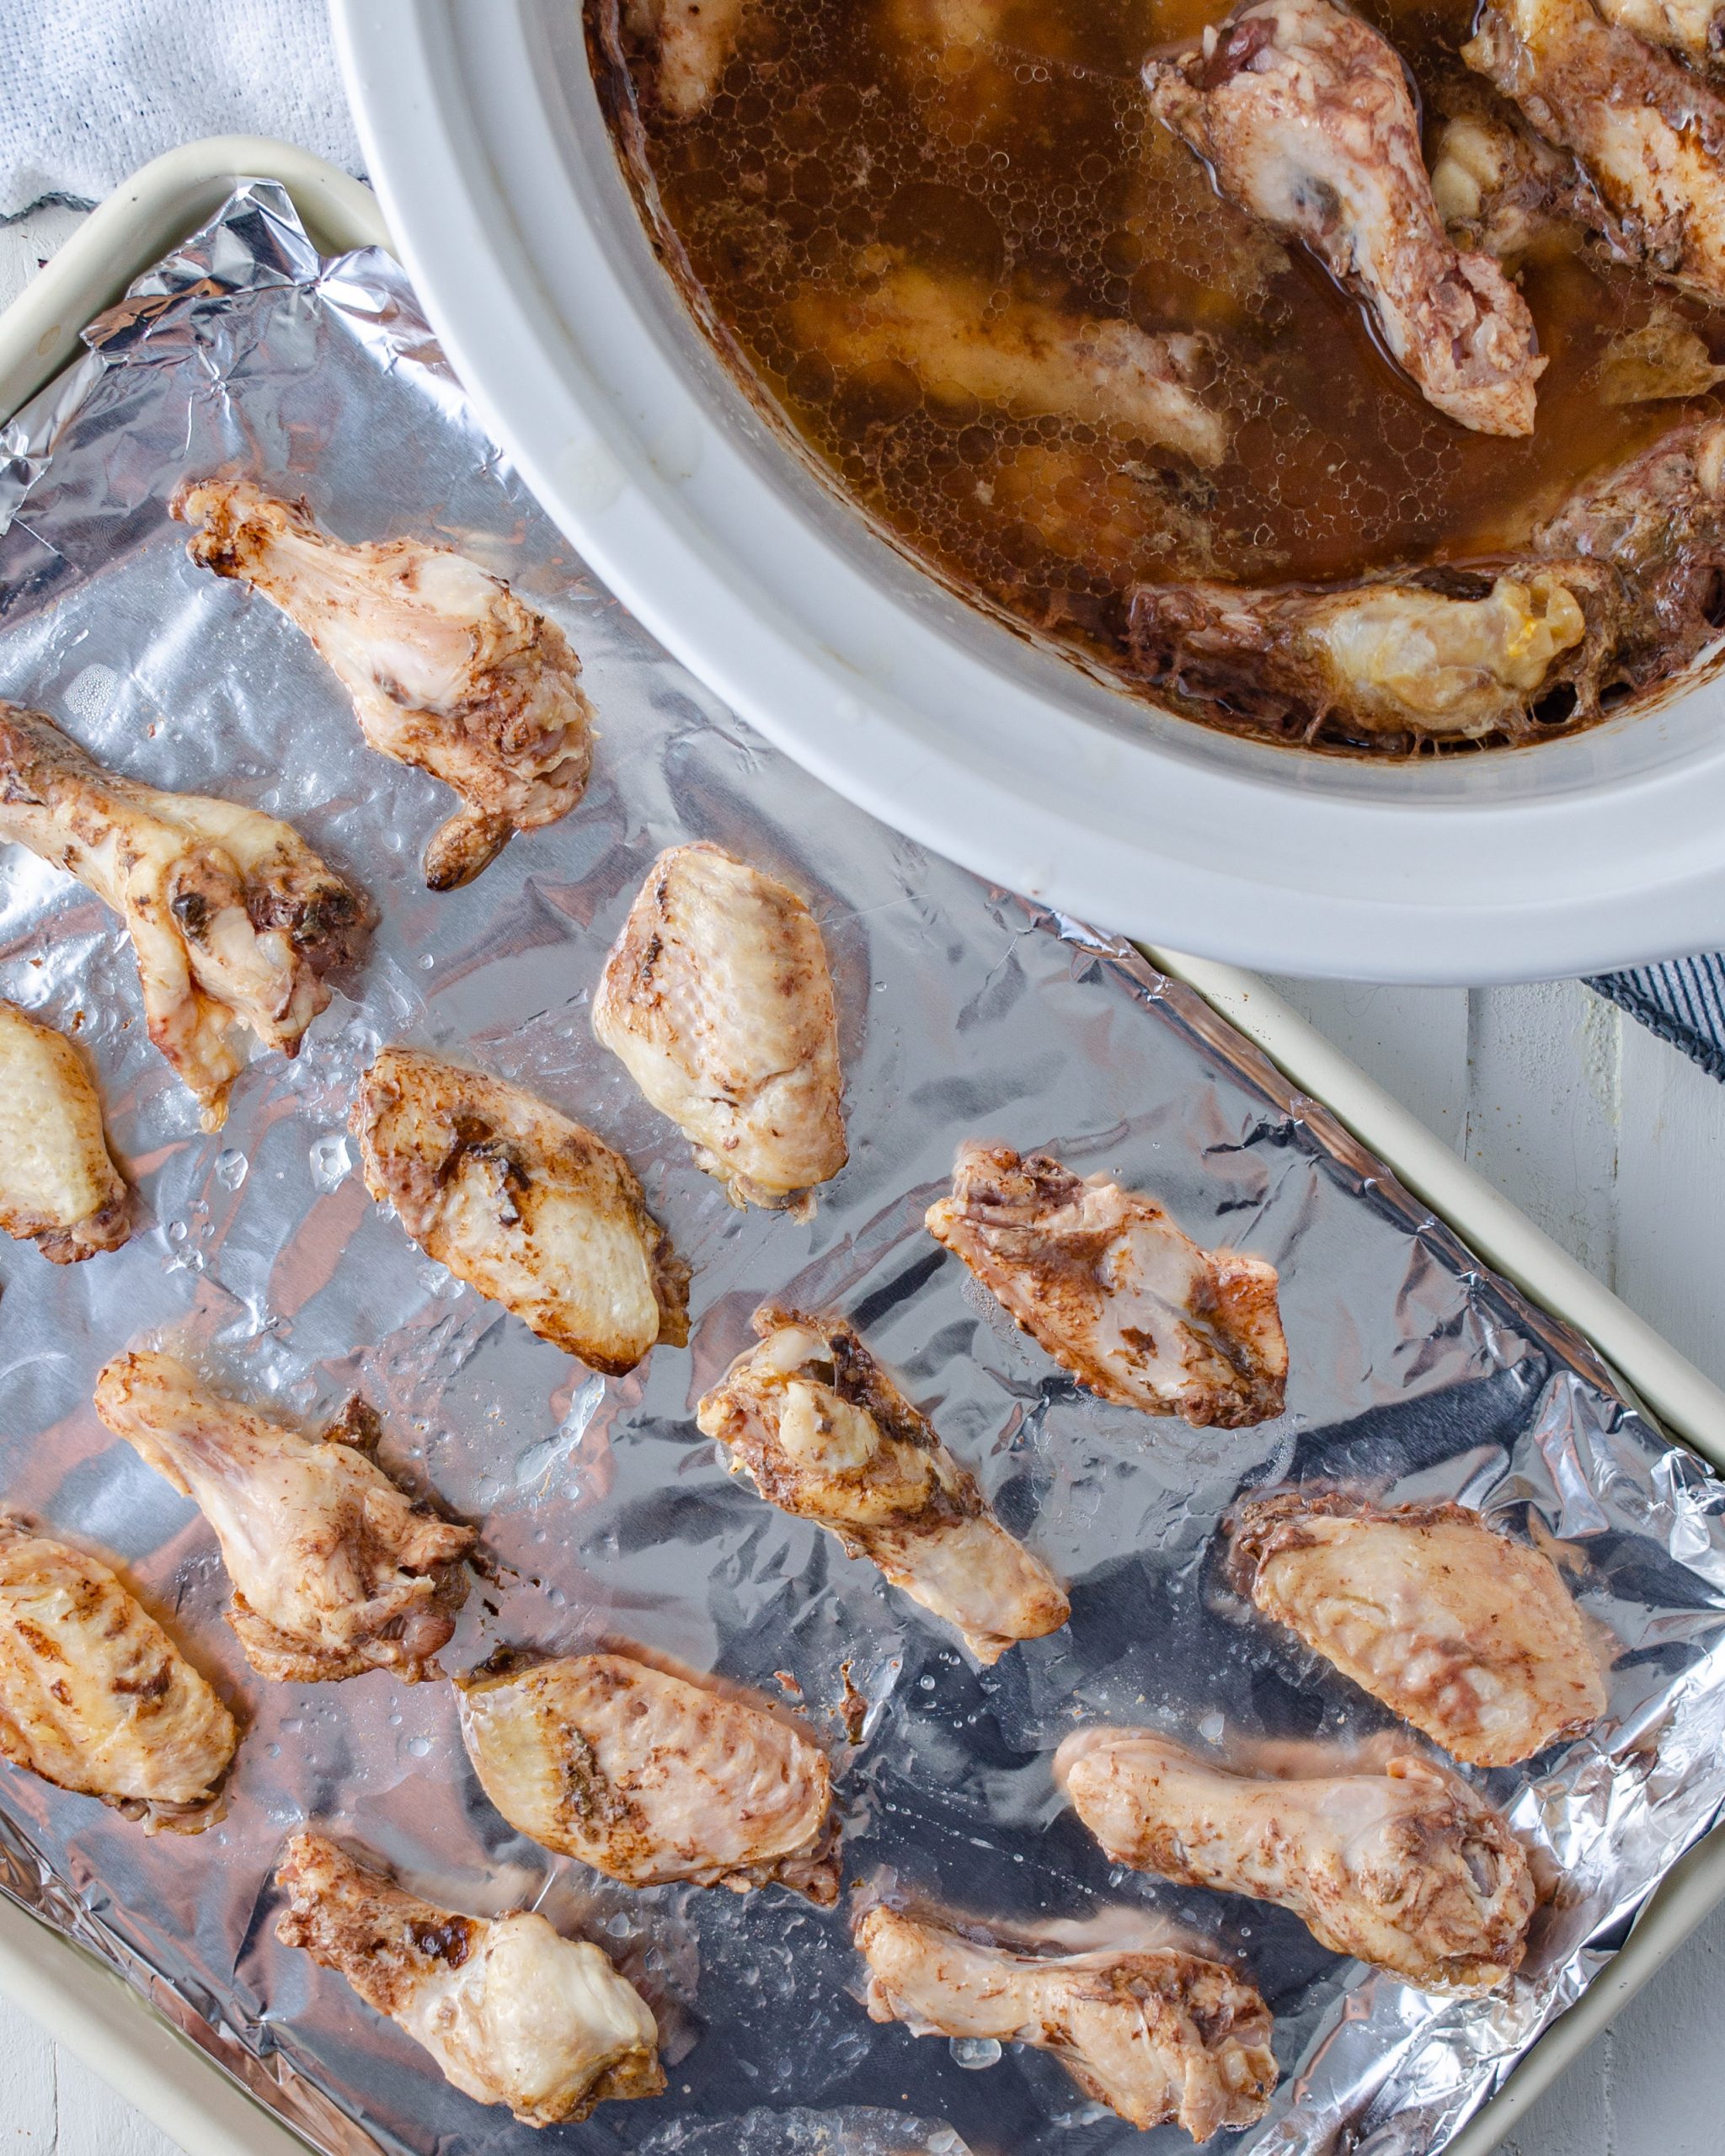 When finished in the slow cooker, place the wings onto an aluminum foil-lined baking sheet. 